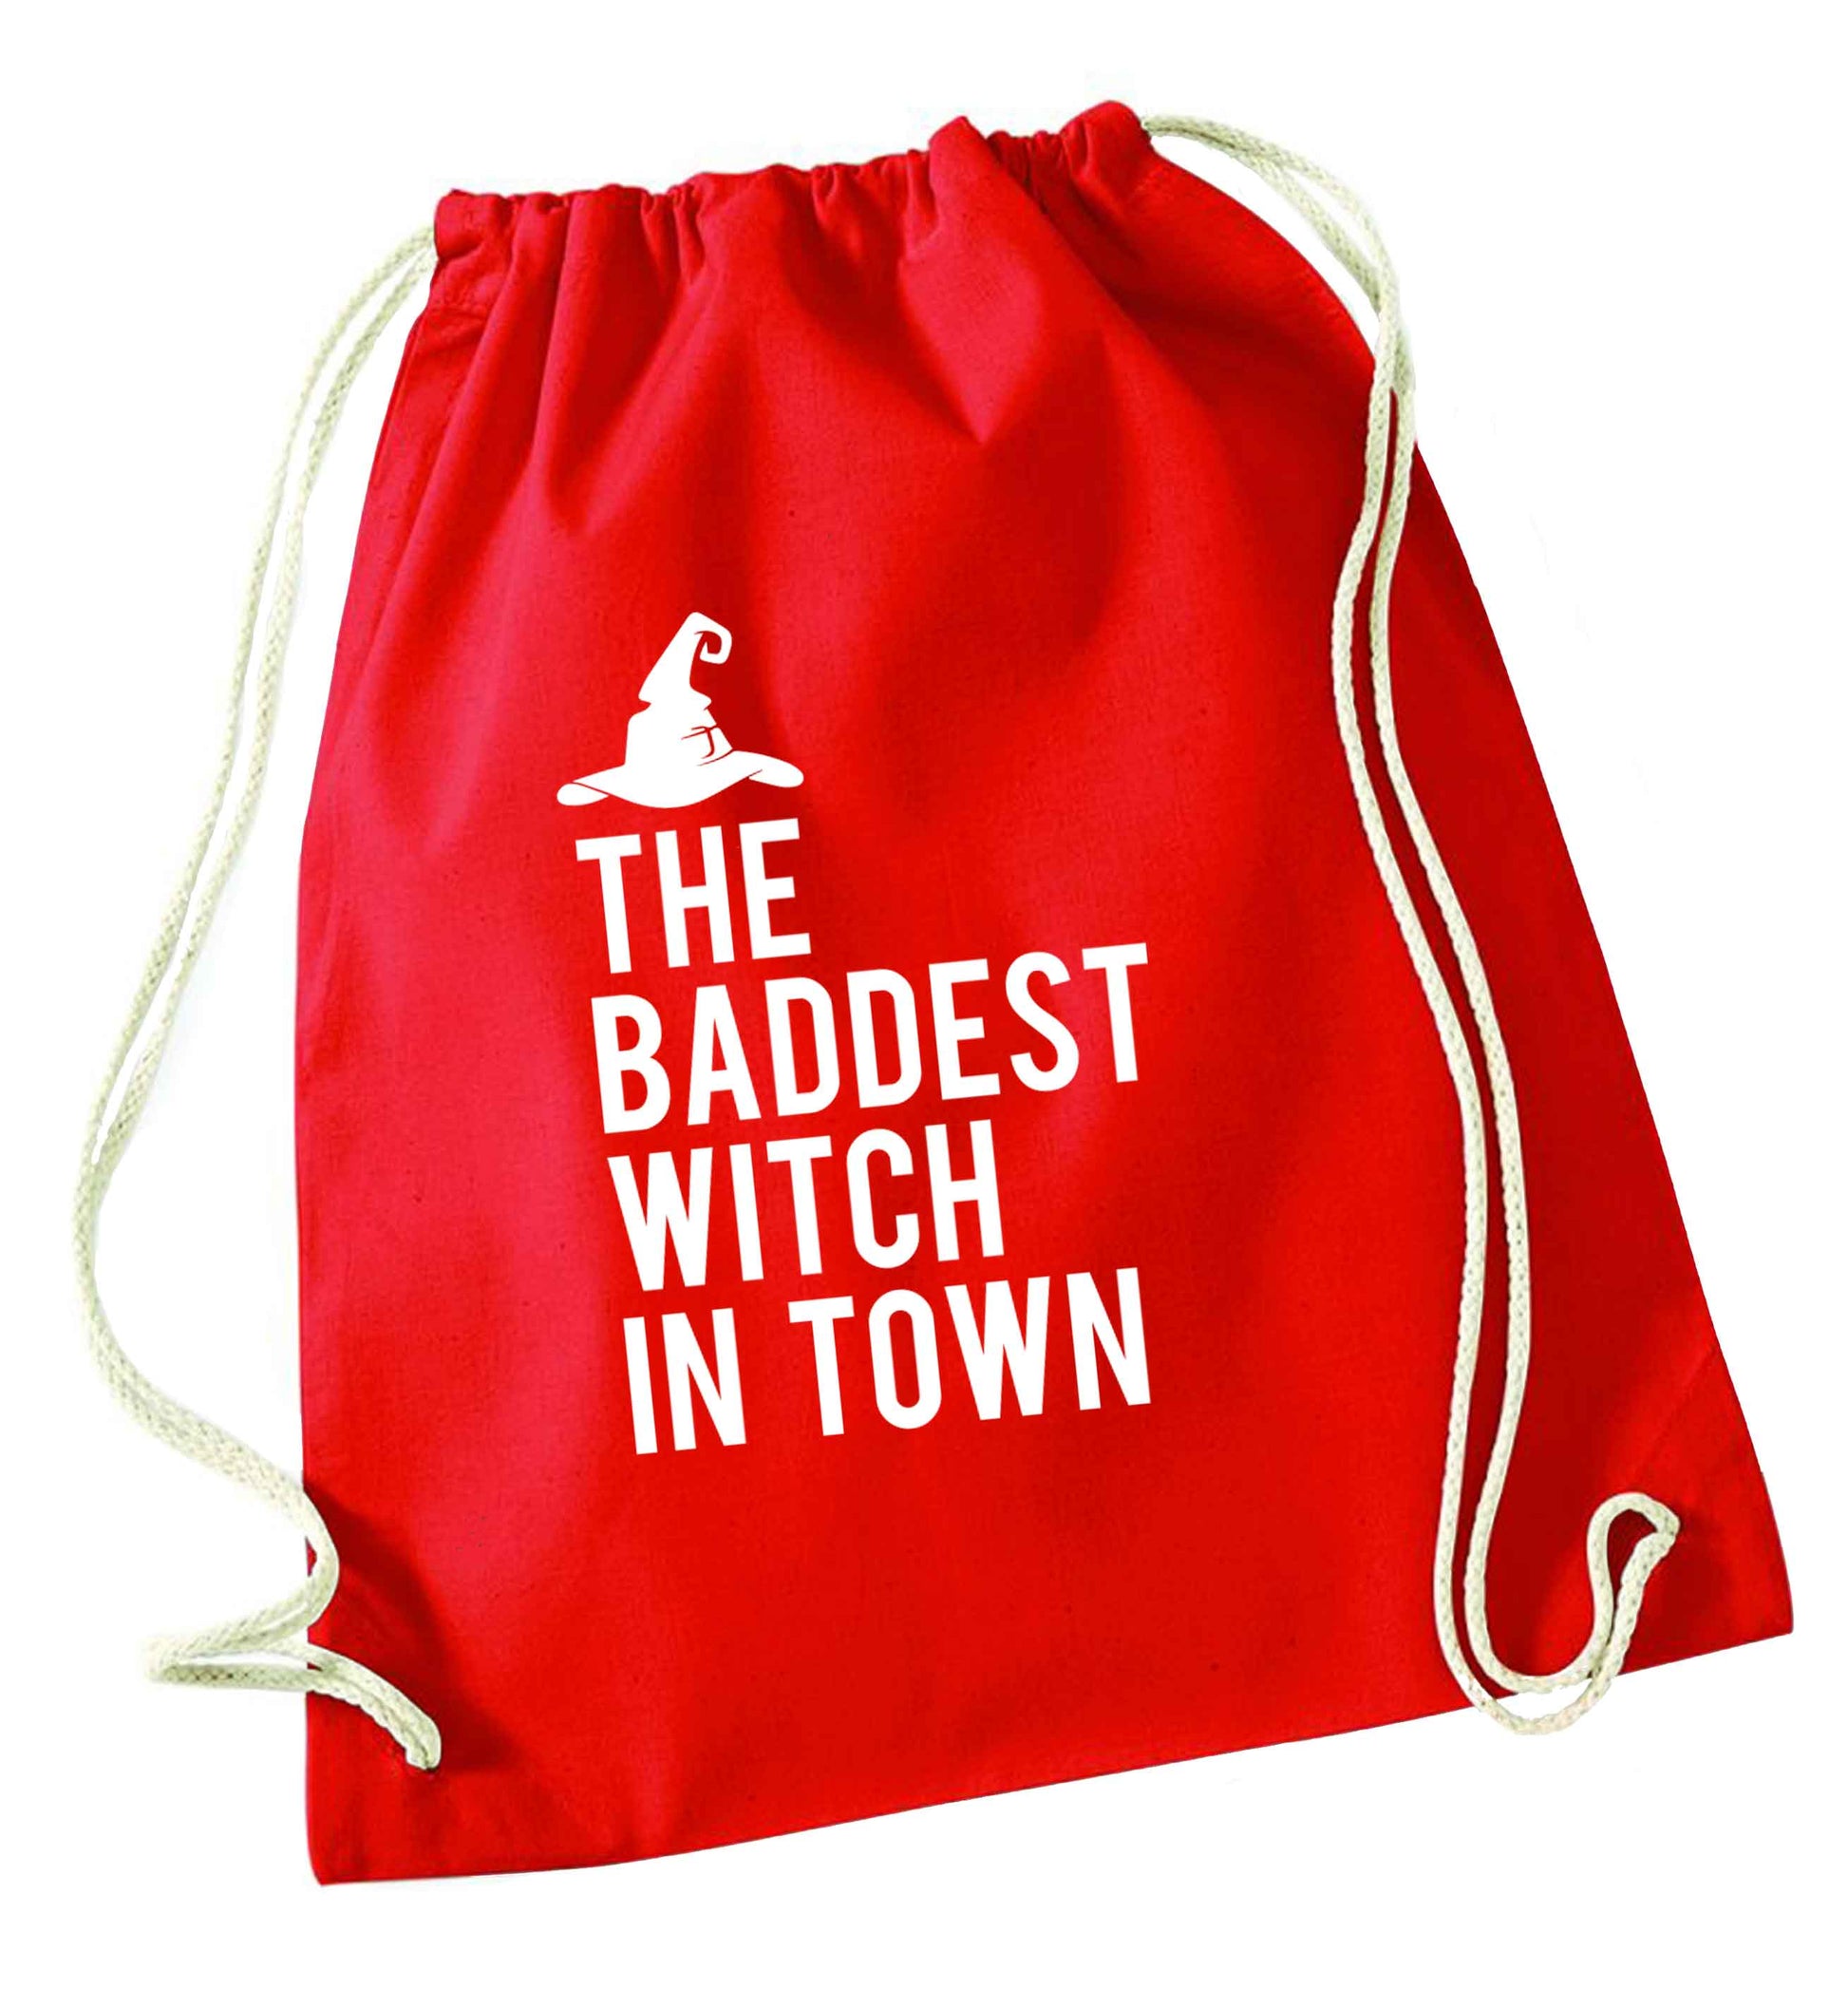 Badest witch in town red drawstring bag 